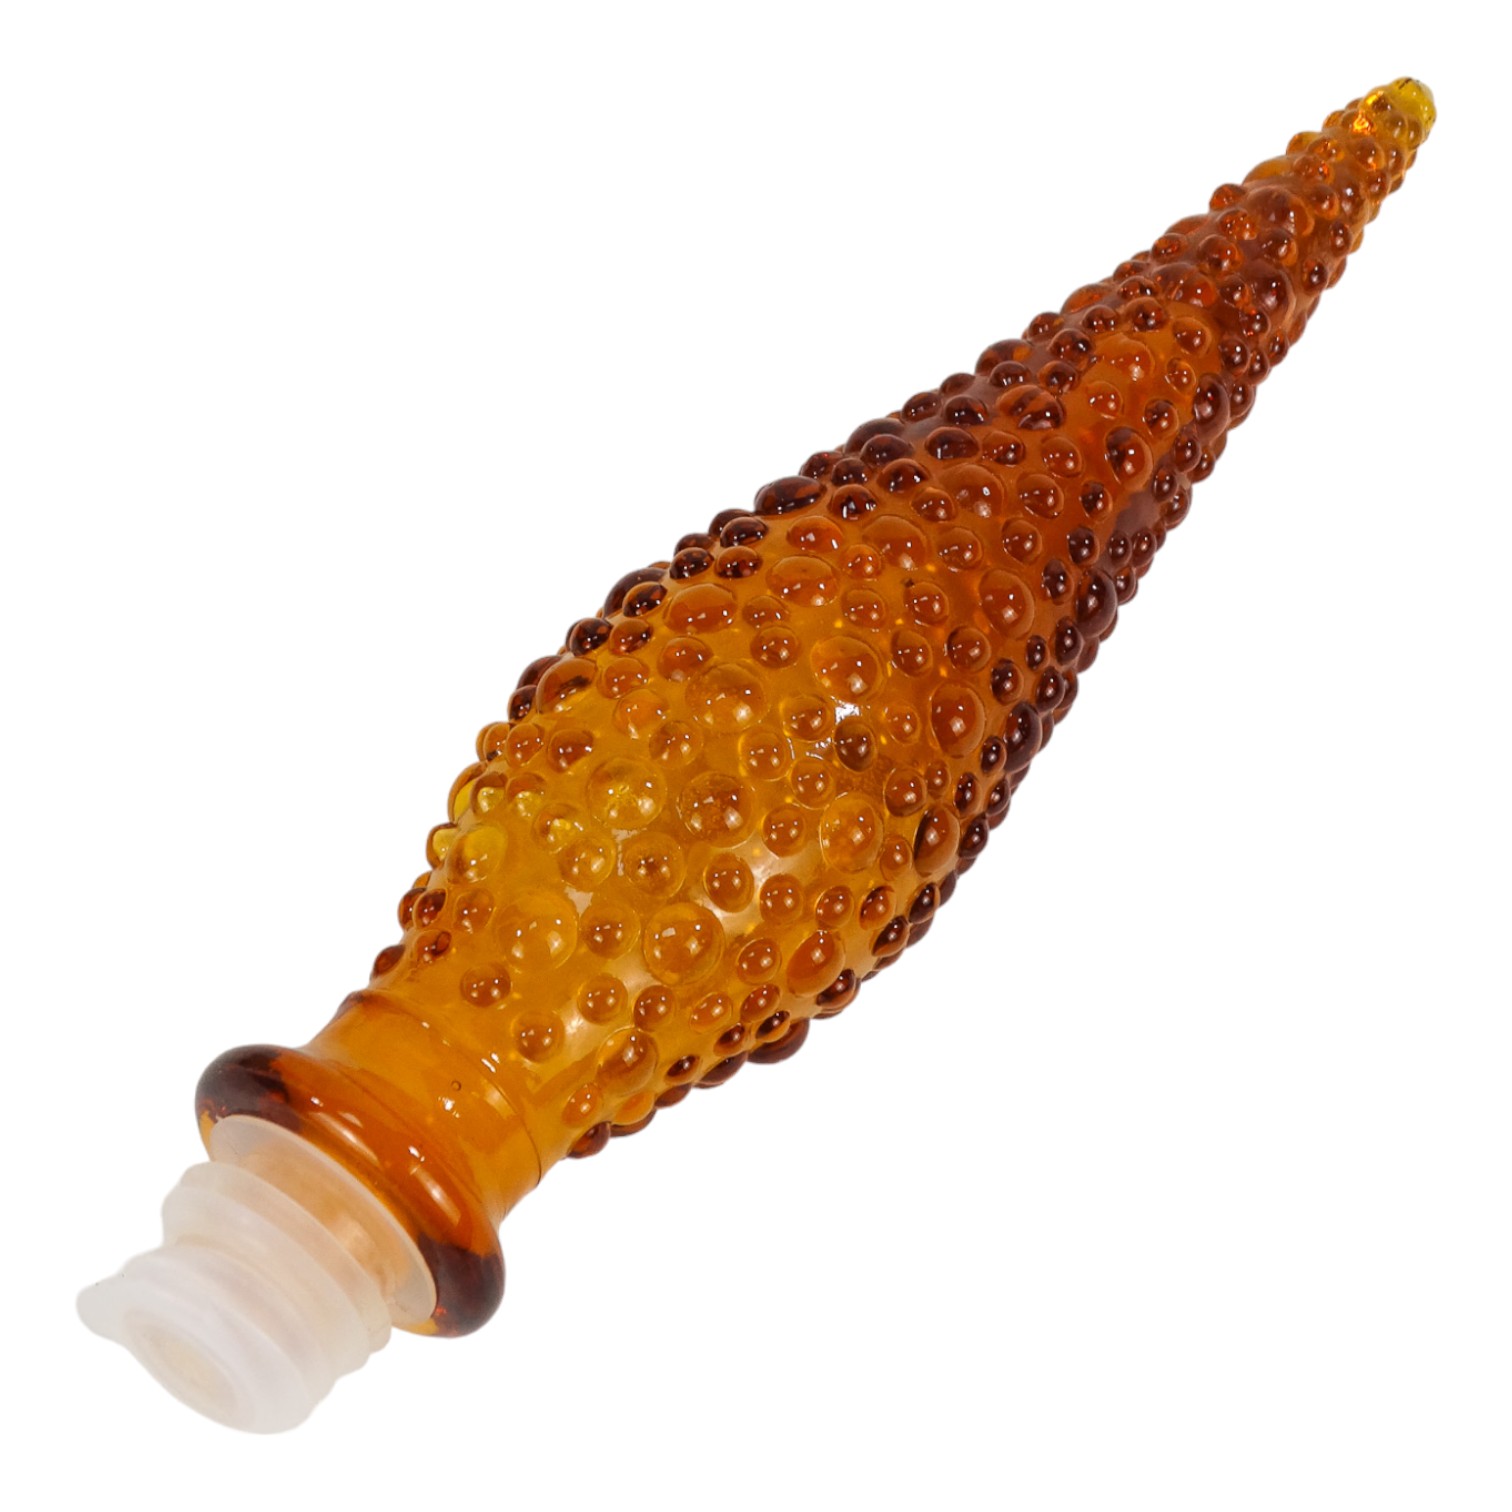 An Empoli genie bottle vase and stopper - amber with blister decoration, 57cm high - Image 5 of 6